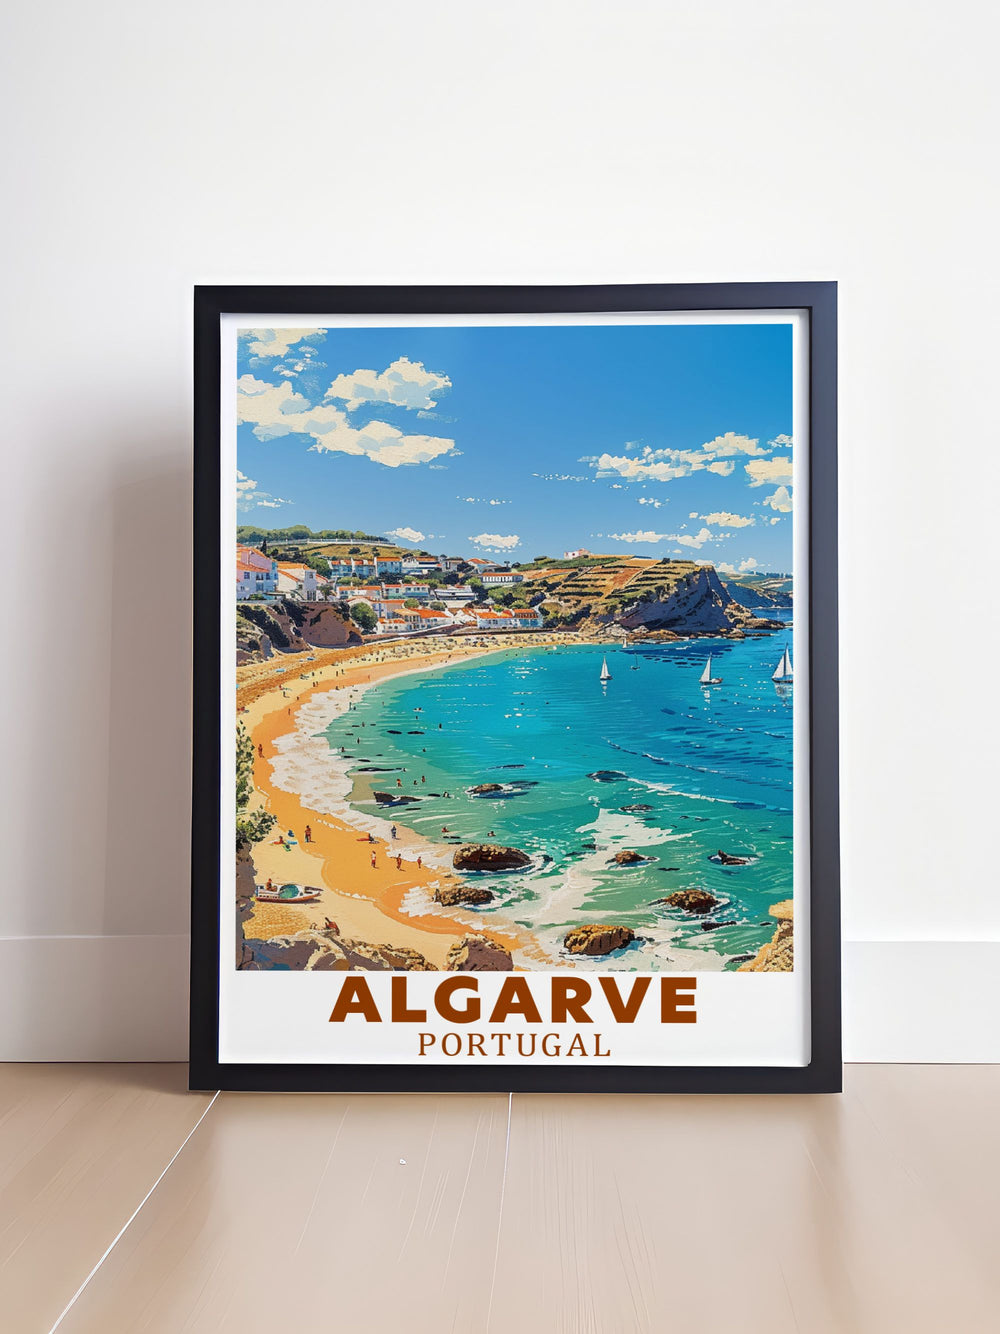 This travel poster captures the picturesque coast town of Lagos in the Algarve, Portugal, showcasing its charming streets and historic architecture, perfect for adding a touch of coastal beauty to your decor.